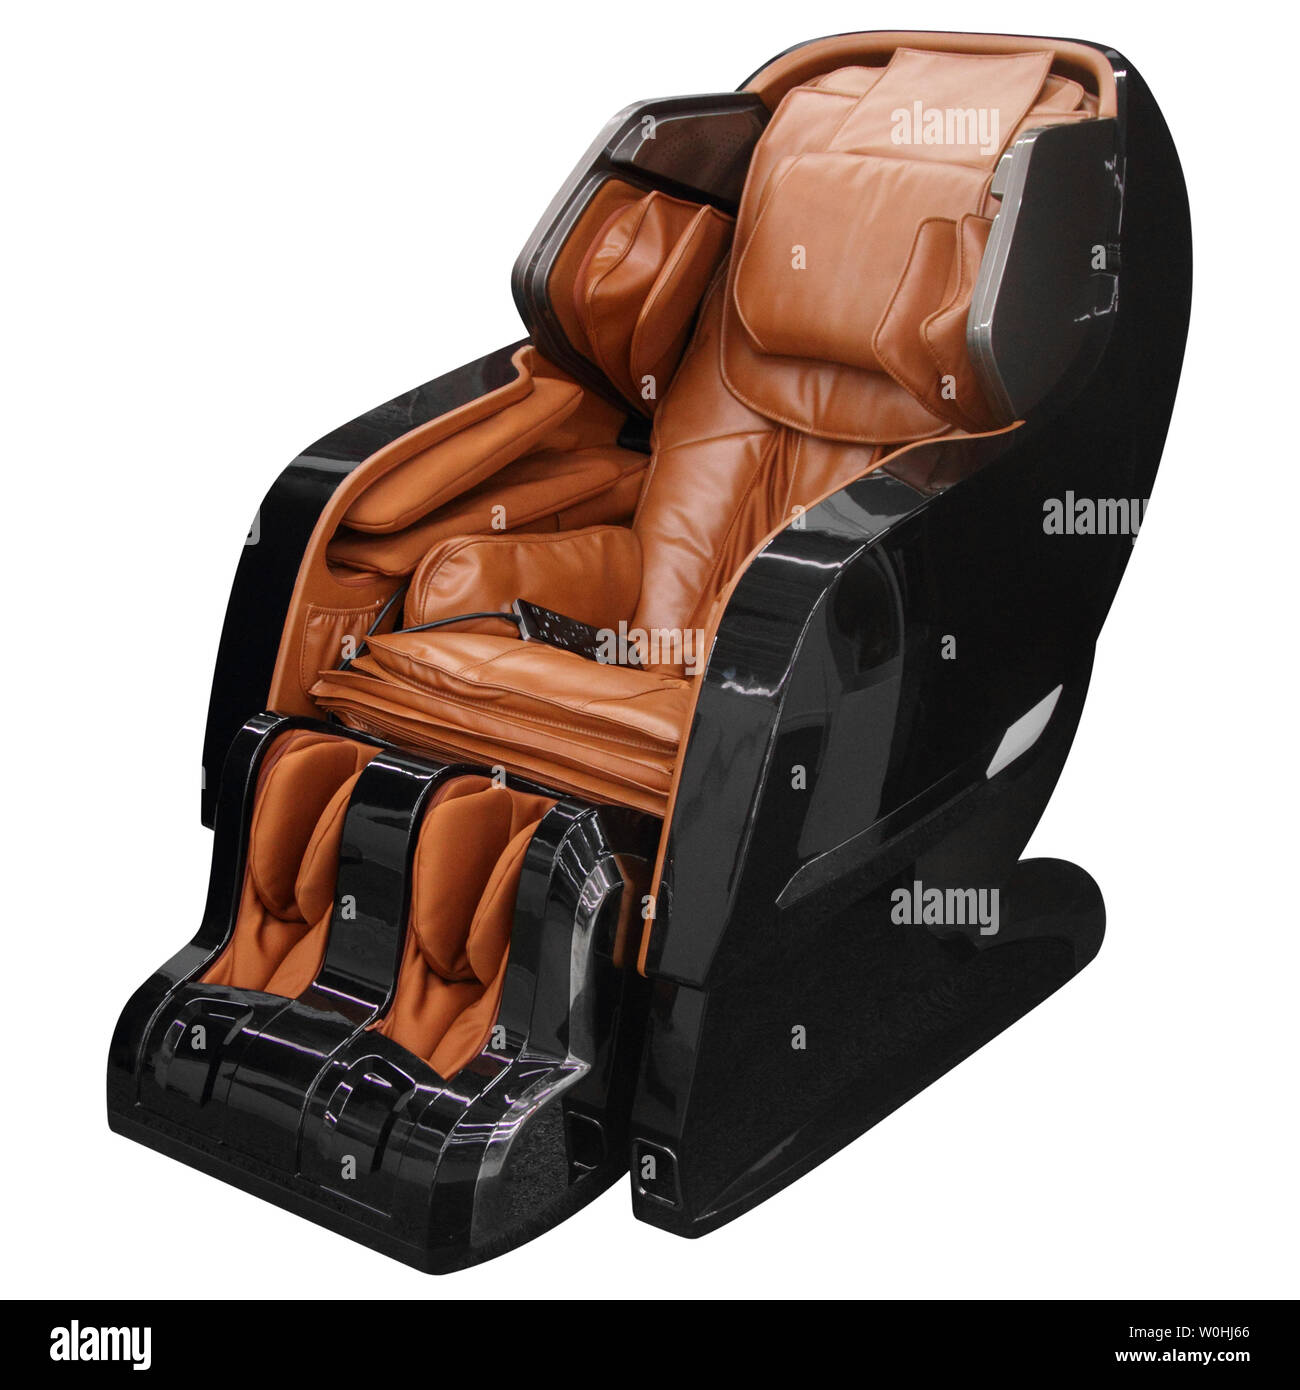 Black massage chair isolated on white background. Stock Photo